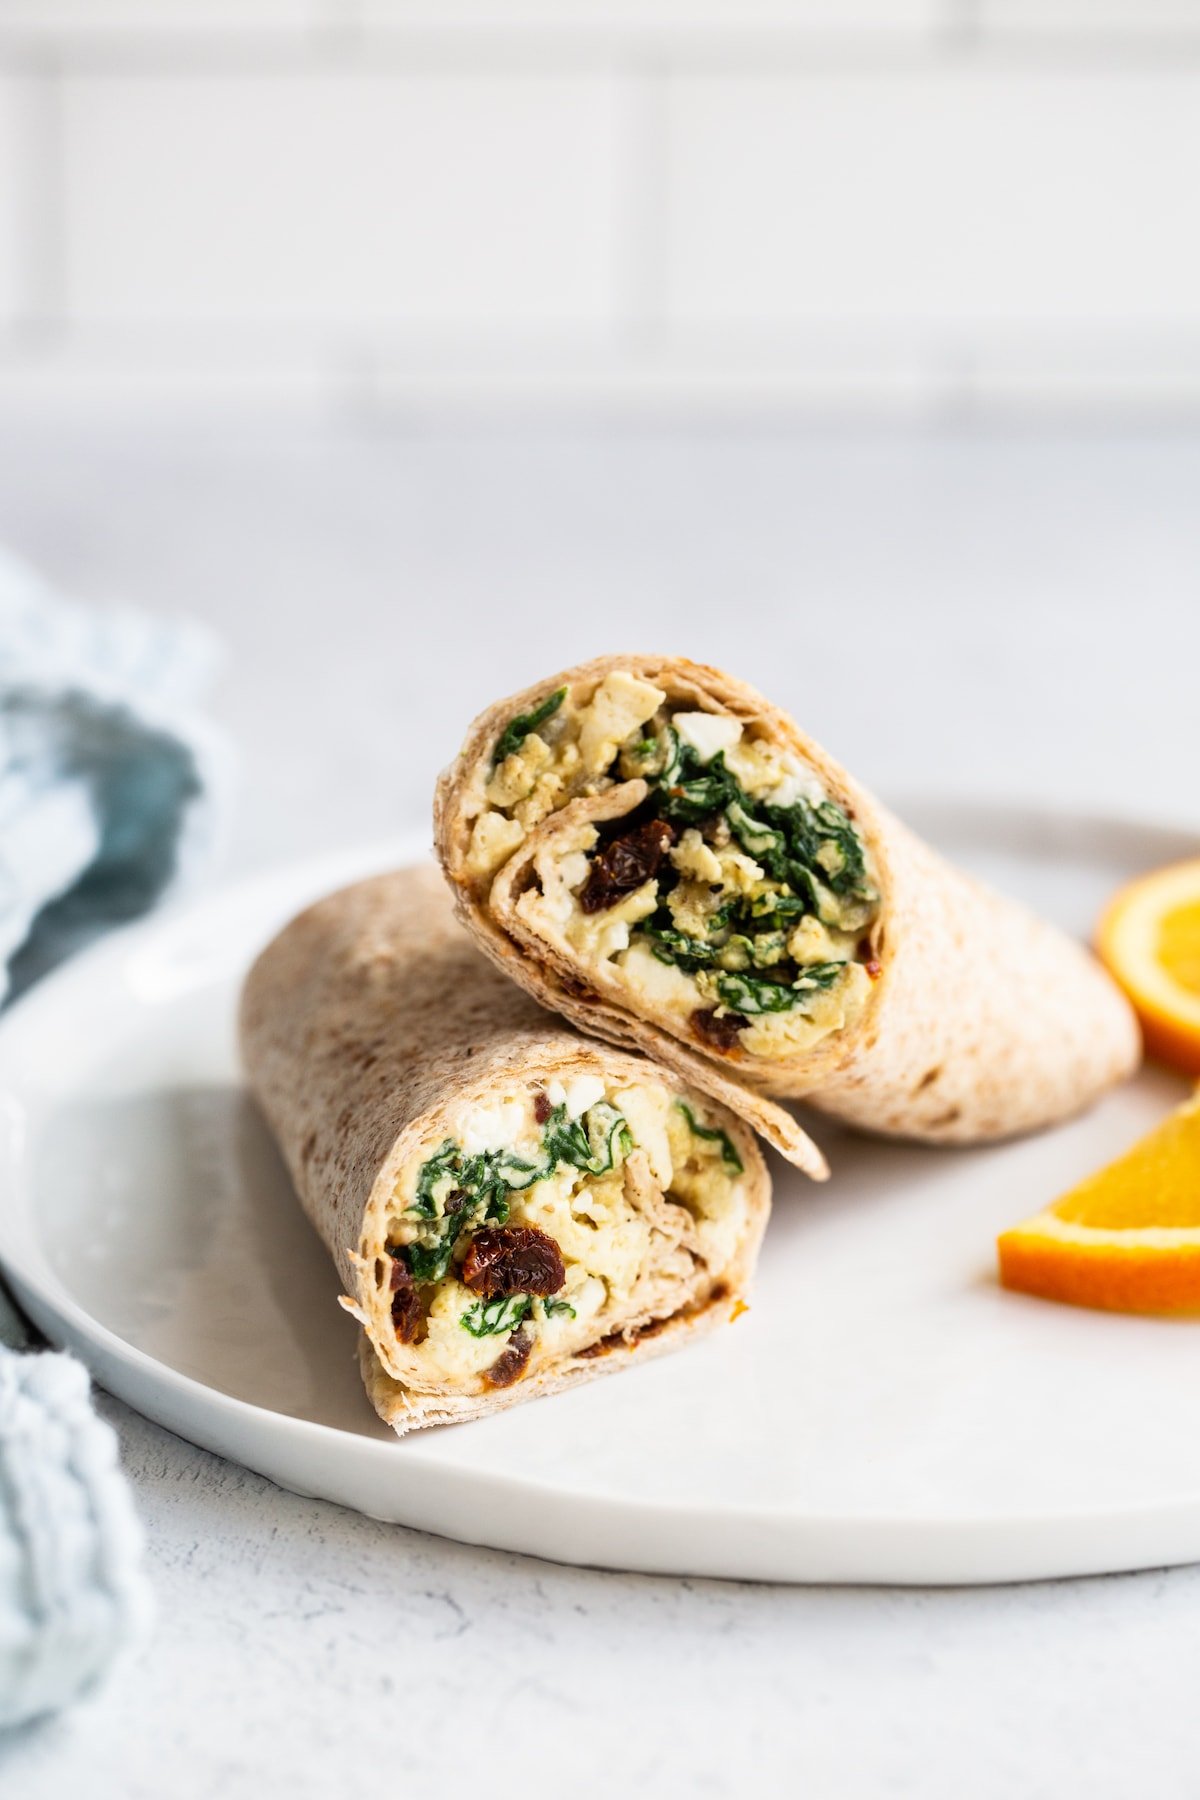 Egg breakfast wrap on a plate with orange slices.